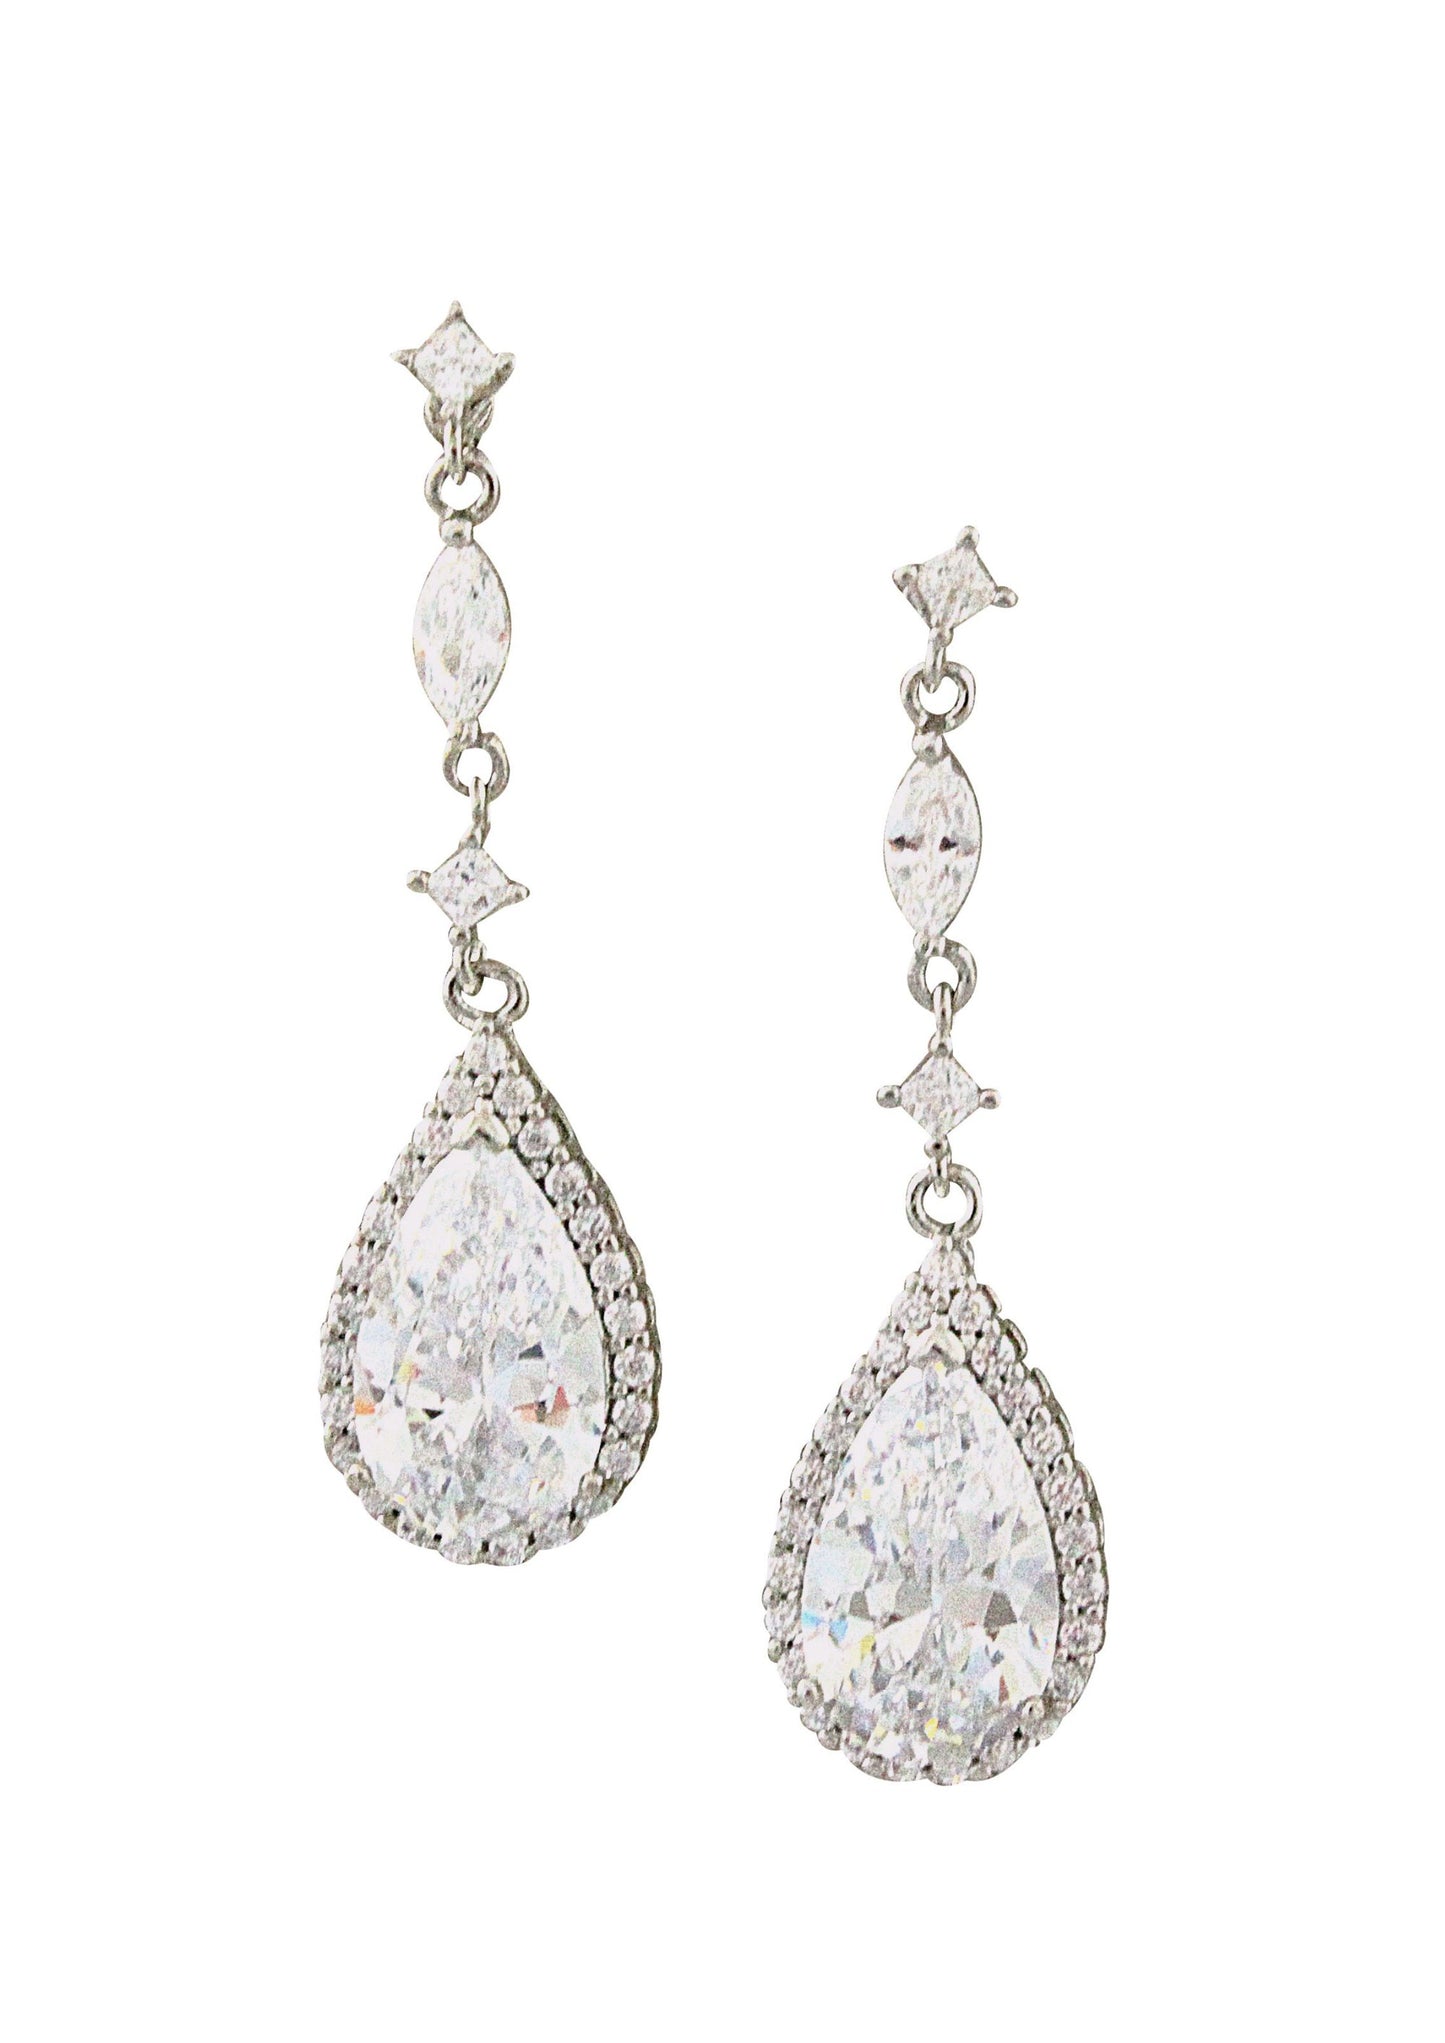 Crystal Linear Drop Earrings Dangle Teardrop Bridal Earrings Silver Chandelier Earrings Art Deco CZ Wedding Jewelry Bridesmaid Gift, BIJOU EARRINGS  for Her, for Bride, for Bridesmaid, for Mother of the Bride or for Guest by Camilla Christine Bridal Jewelry and Wedding Accessories Bridal Style Inspiration Trends for Bride